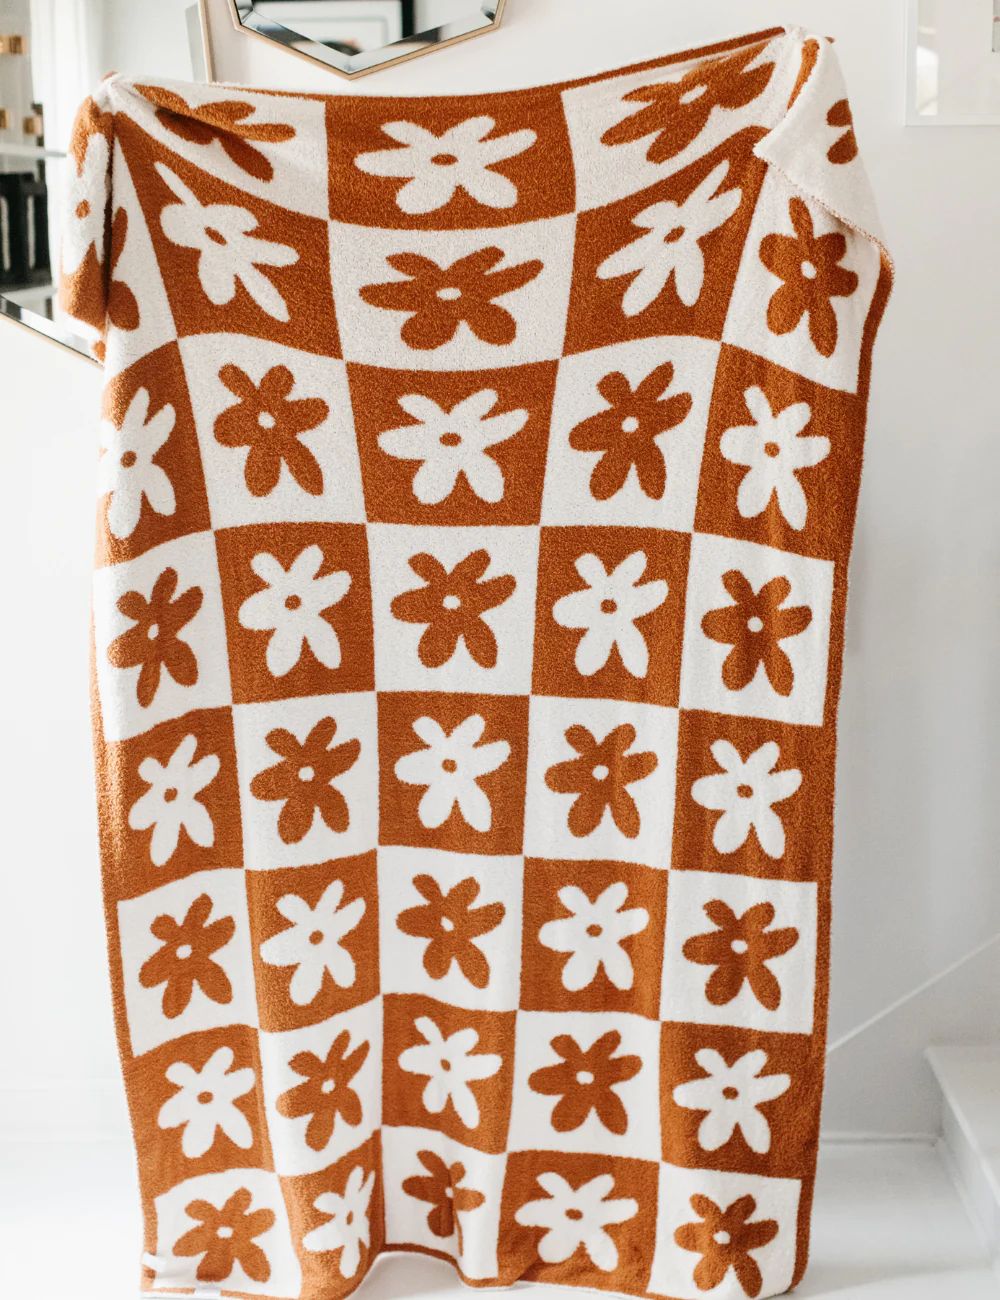 TSC x Tia Booth: Mod Daisy Buttery Blanket | The Styled Collection